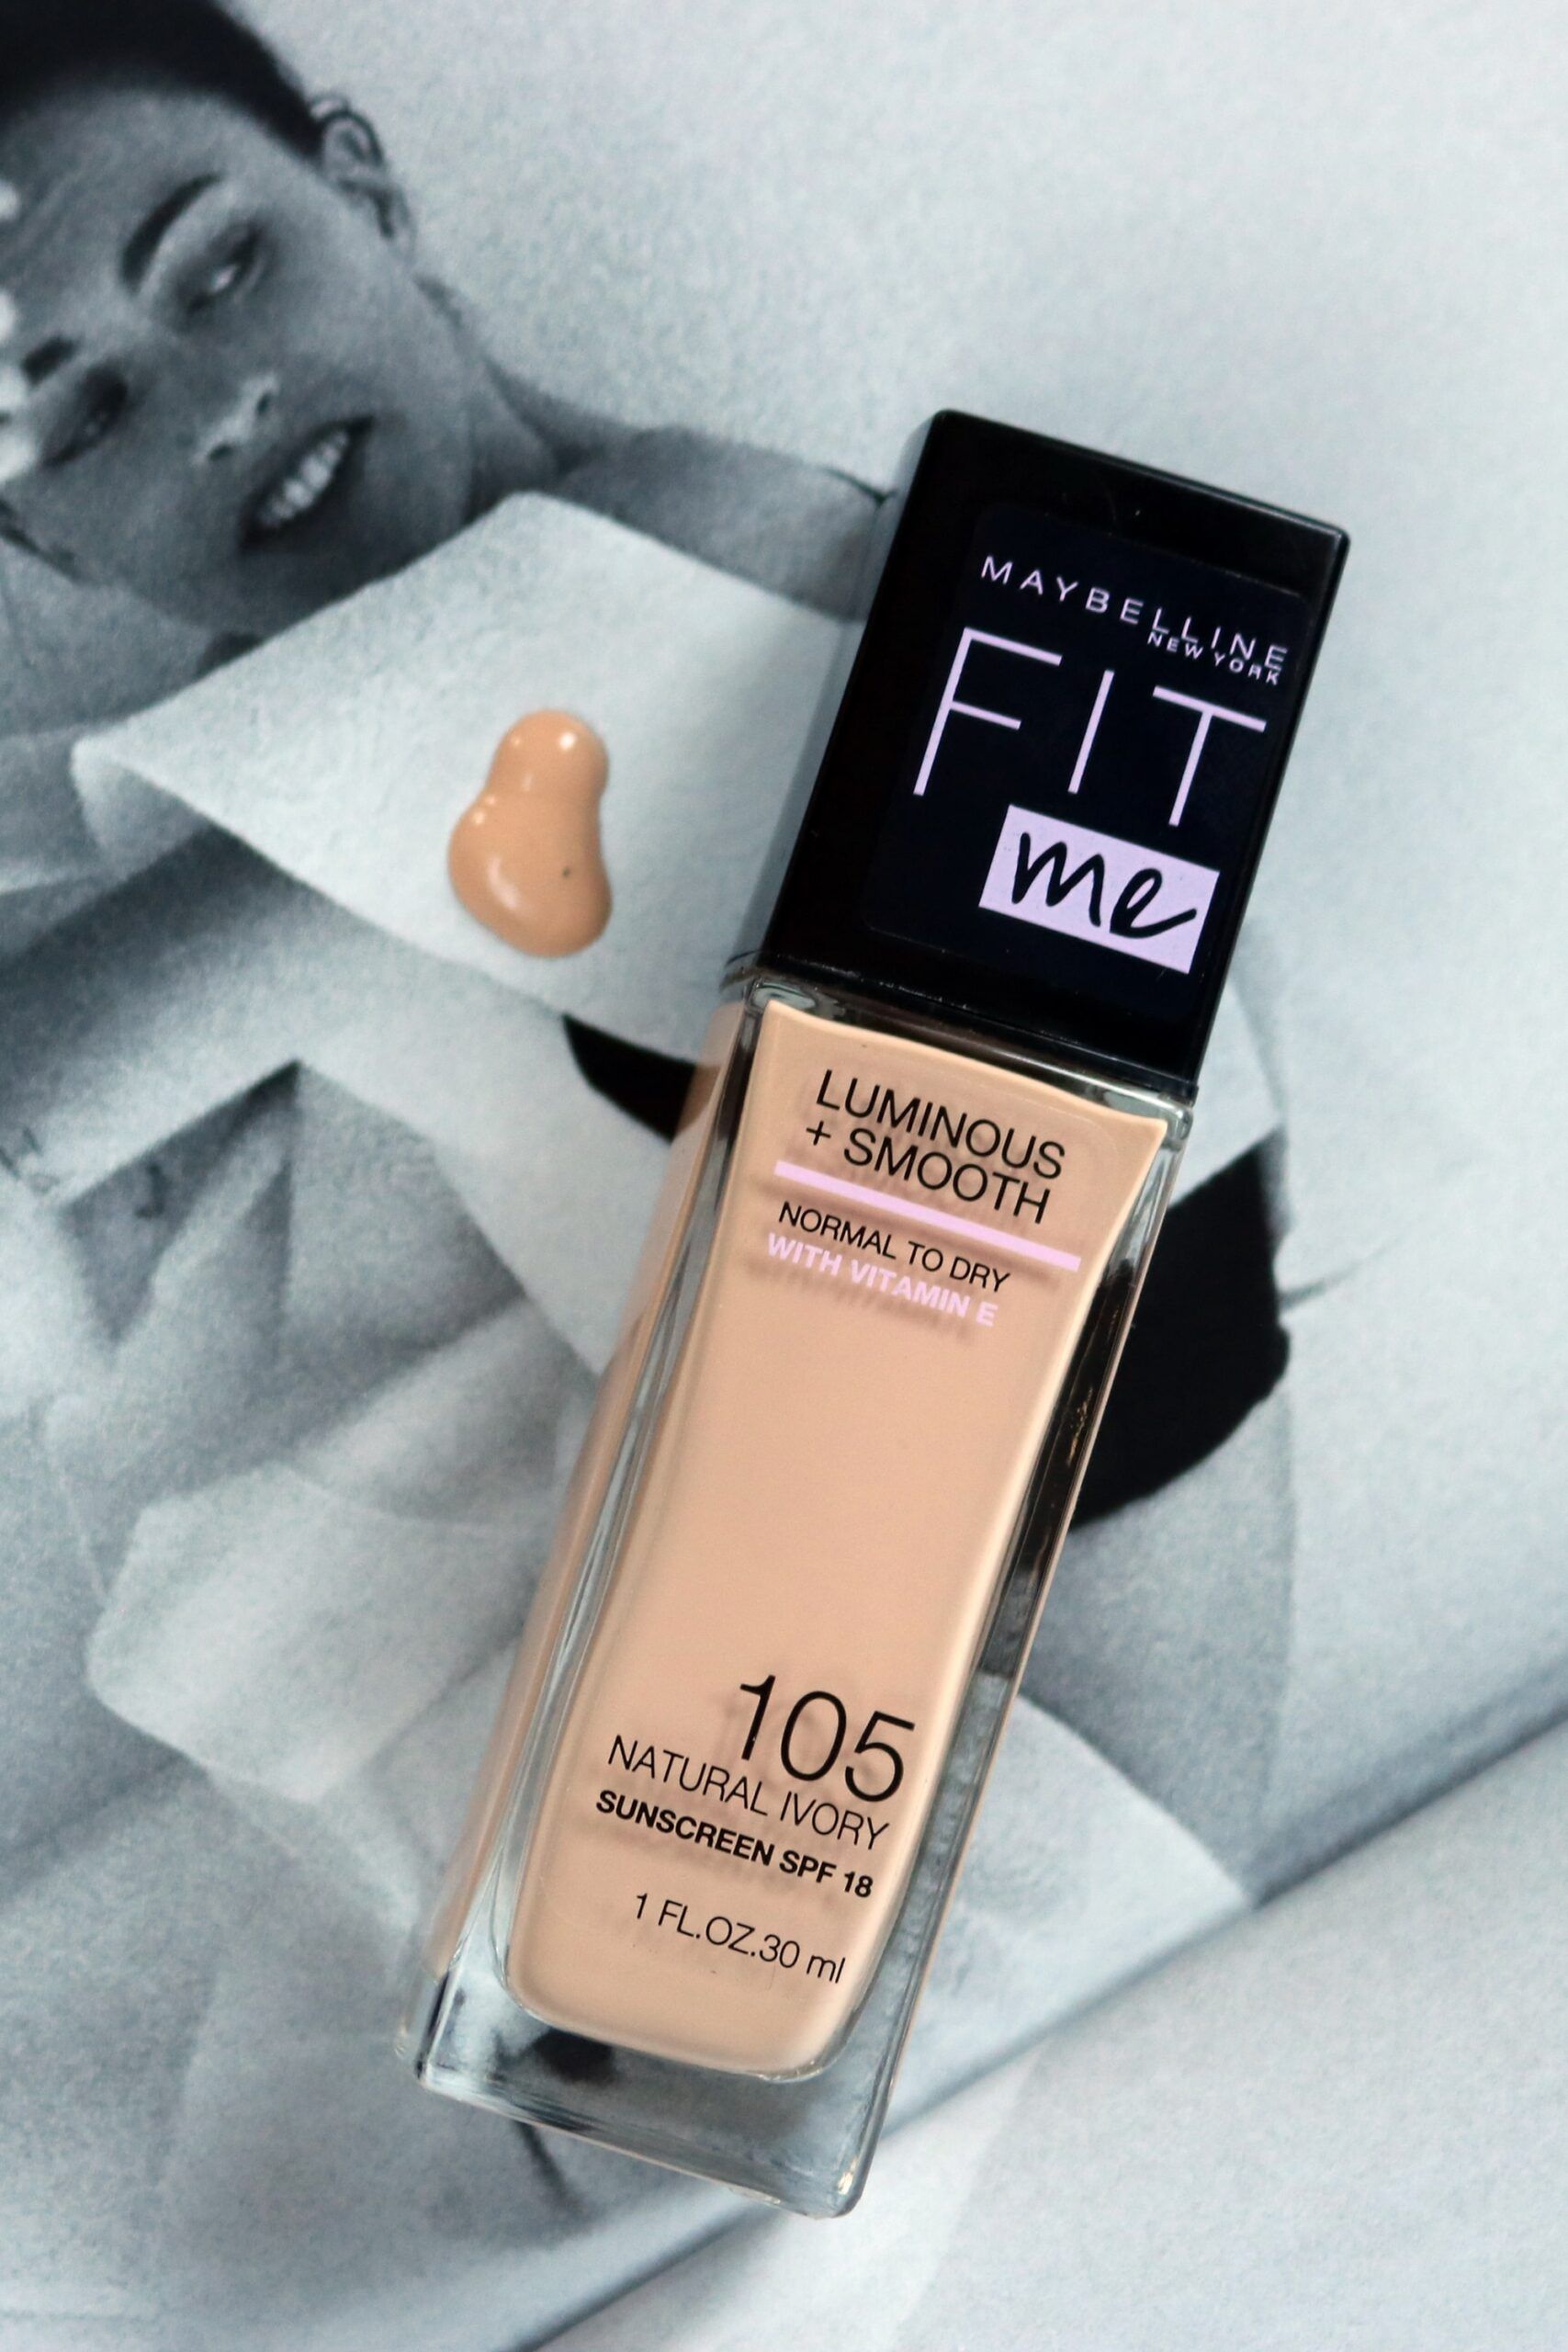 Maybelline Fit Me Luminous + Smooth opinie